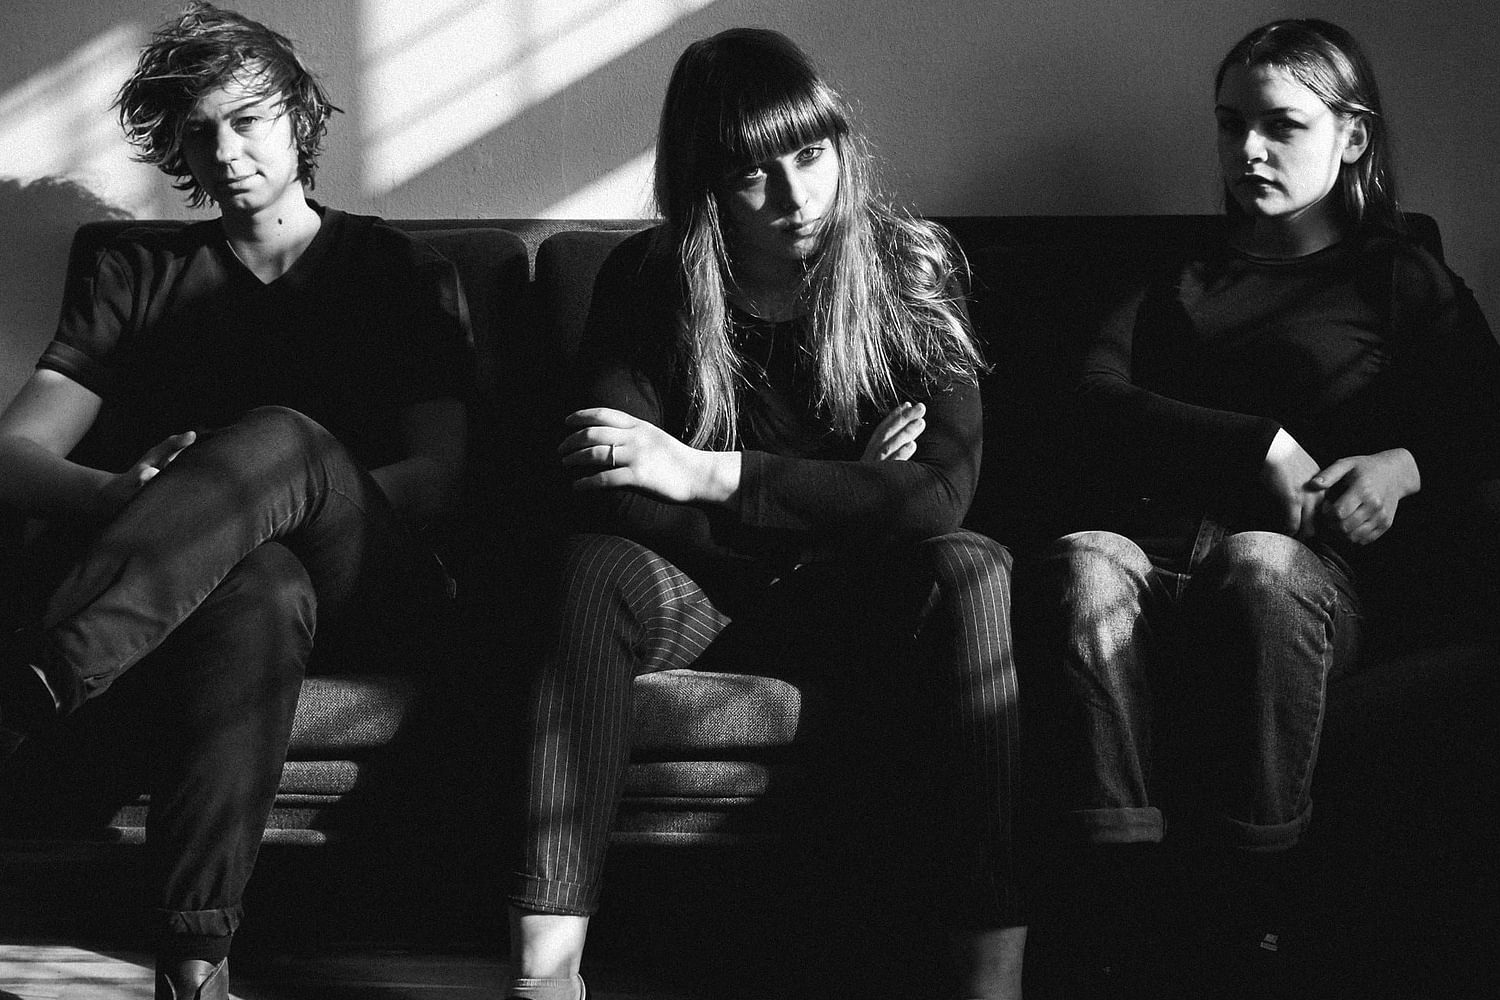 Baby in Vain go torch-crazy for ‘Martha’s View’ video